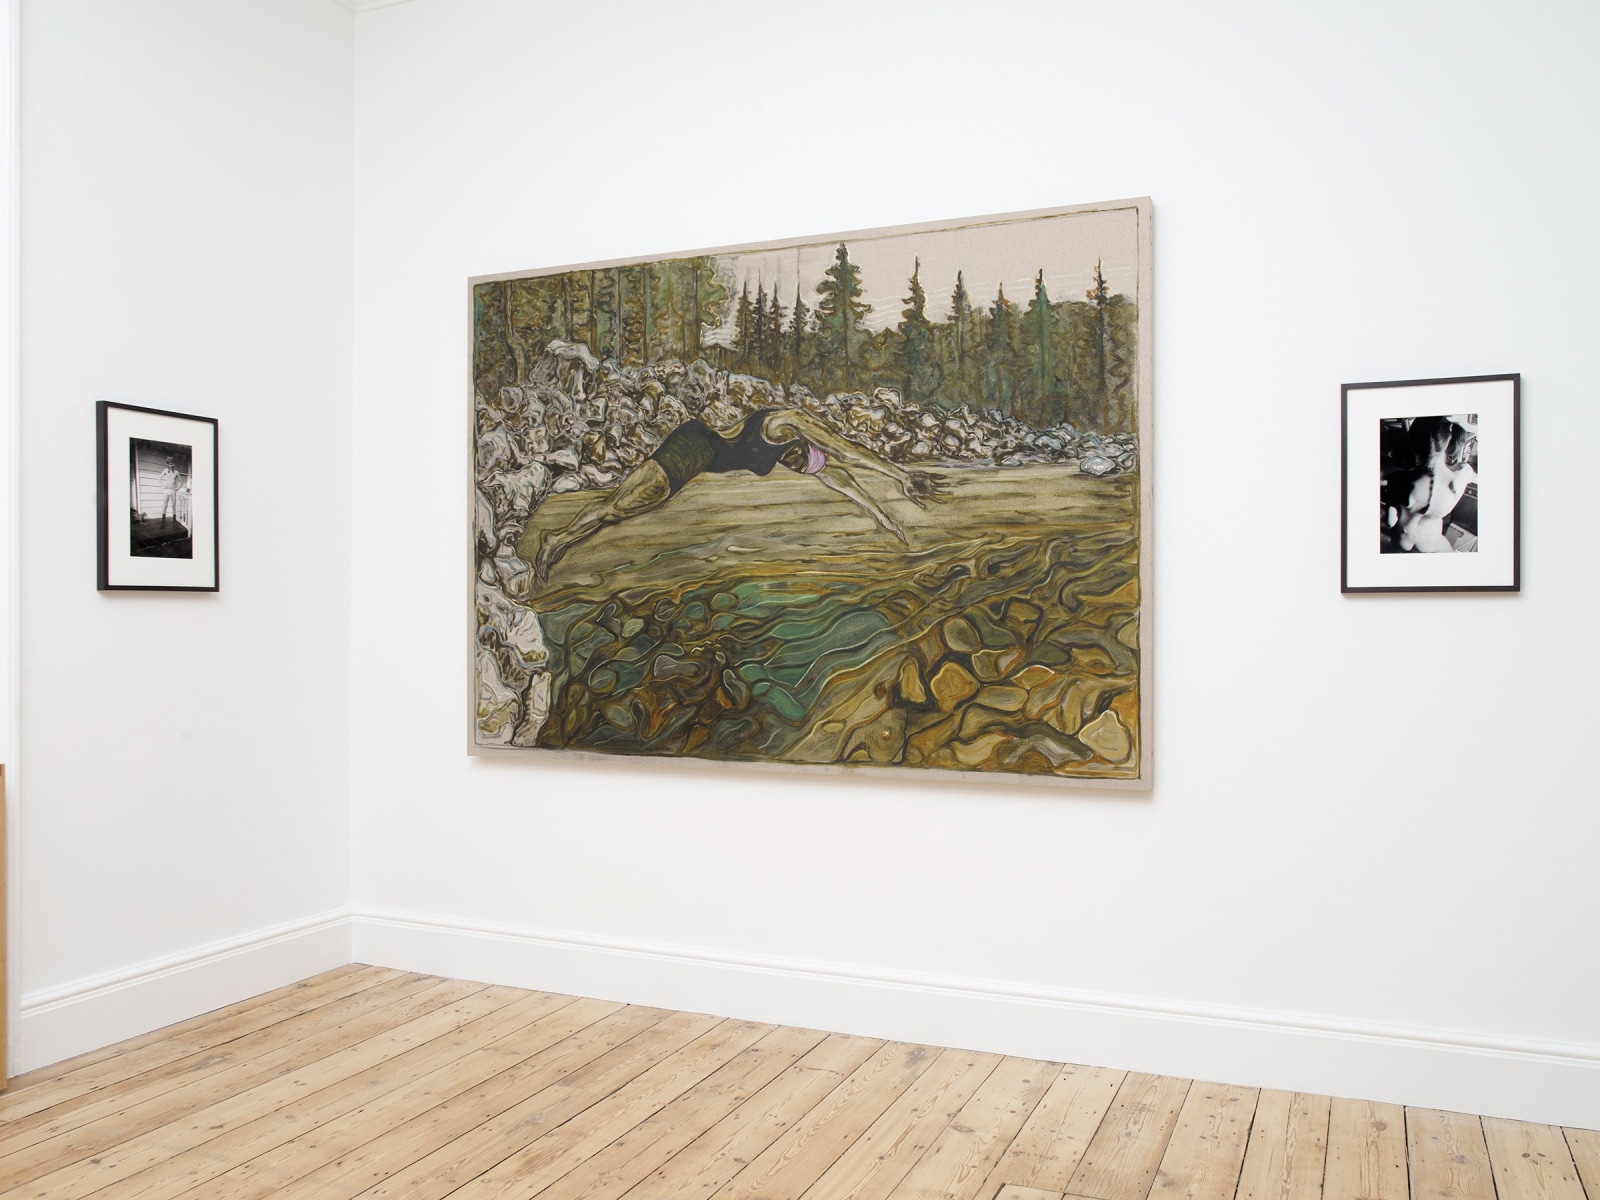 Billy Childish,&nbsp;In Residence, Installation view, Lehmann Maupin, London, 2020